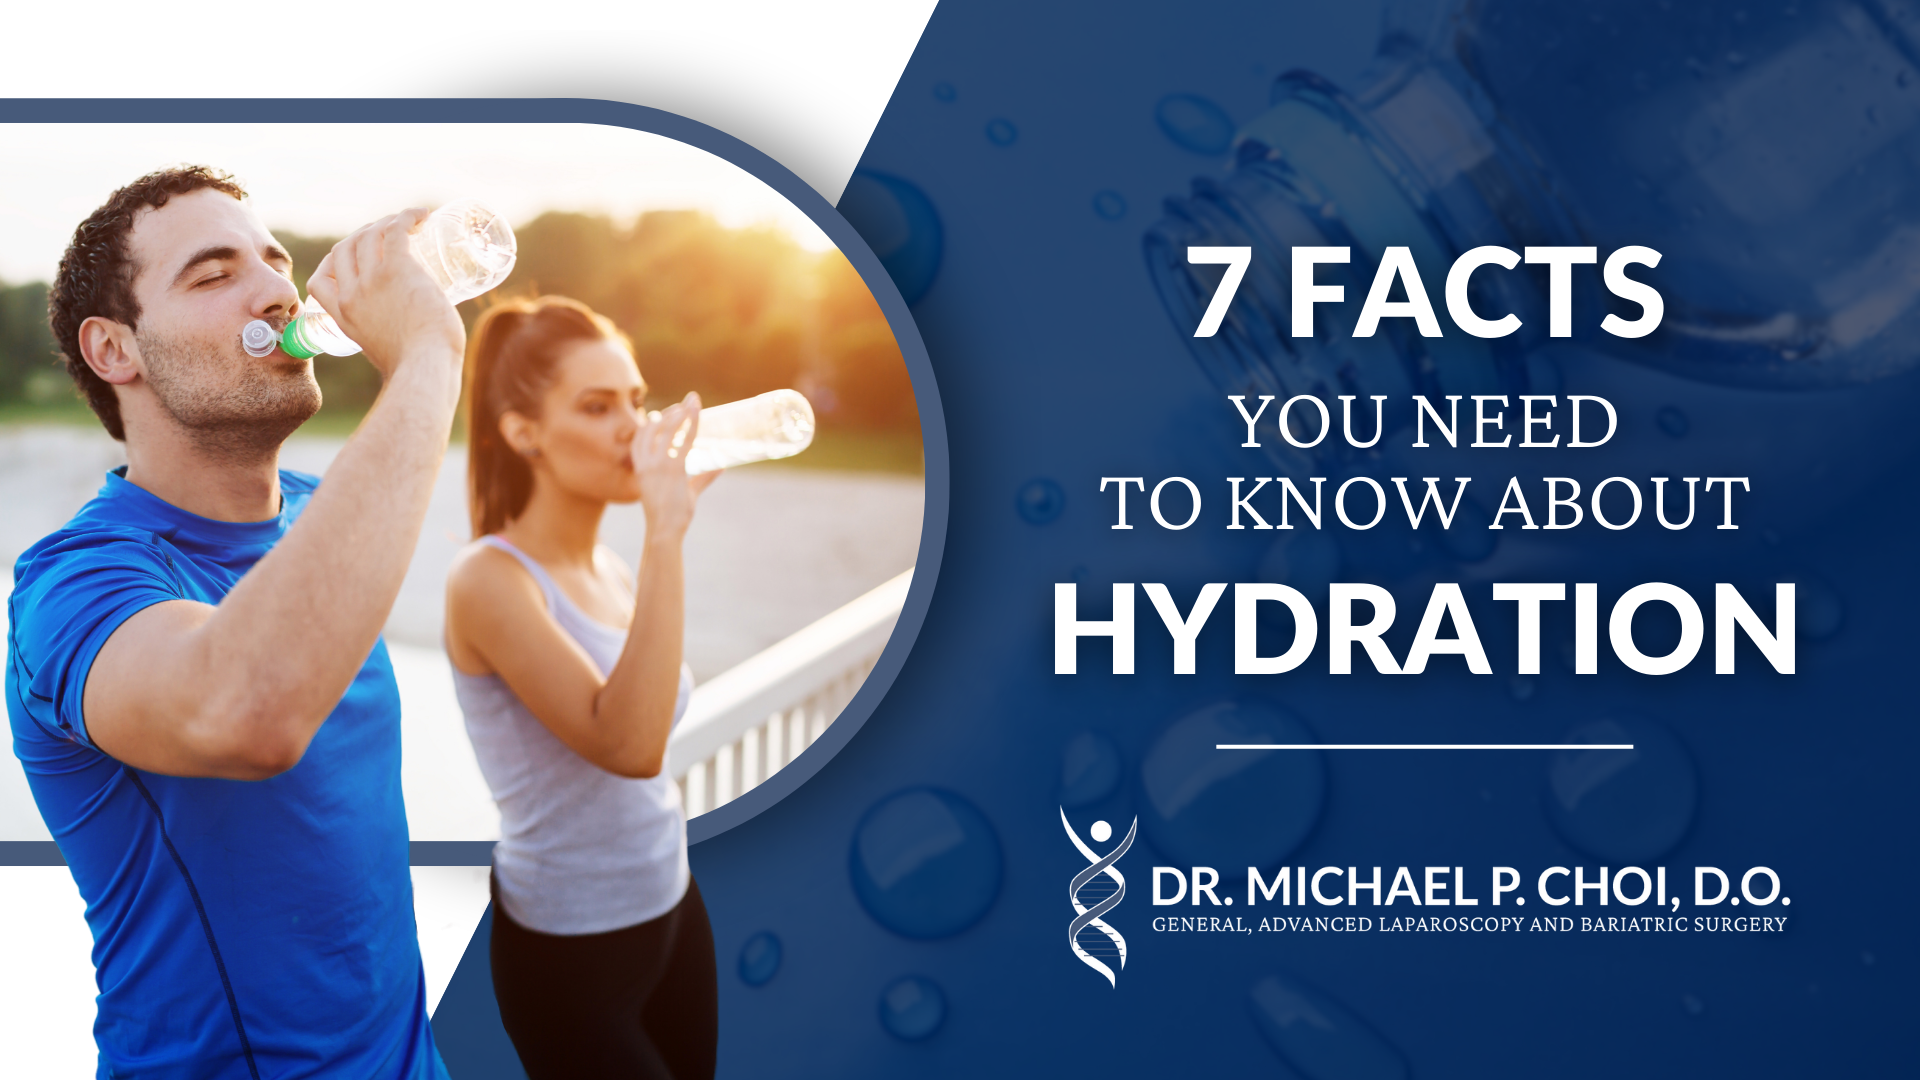 7 FACTS YOU NEED TO KNOW ABOUT HYDRATION